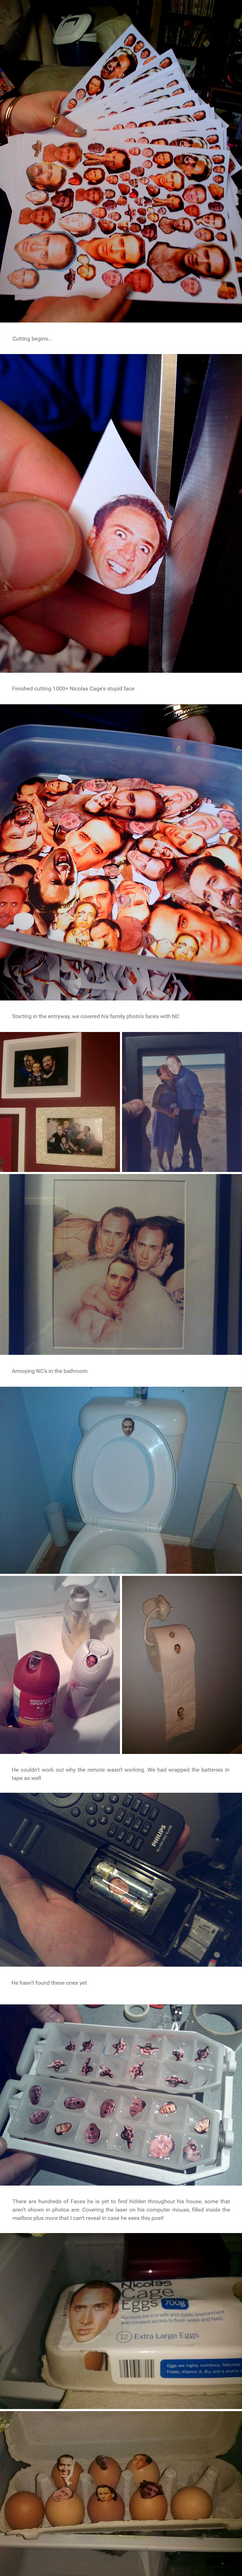 So My Brother Thinks Nicolas Cage Is A Big D-Bag. We Have A History Of Pranking Each Other In Ridiculous Ways, So My Gf And I Came Up With The Idea